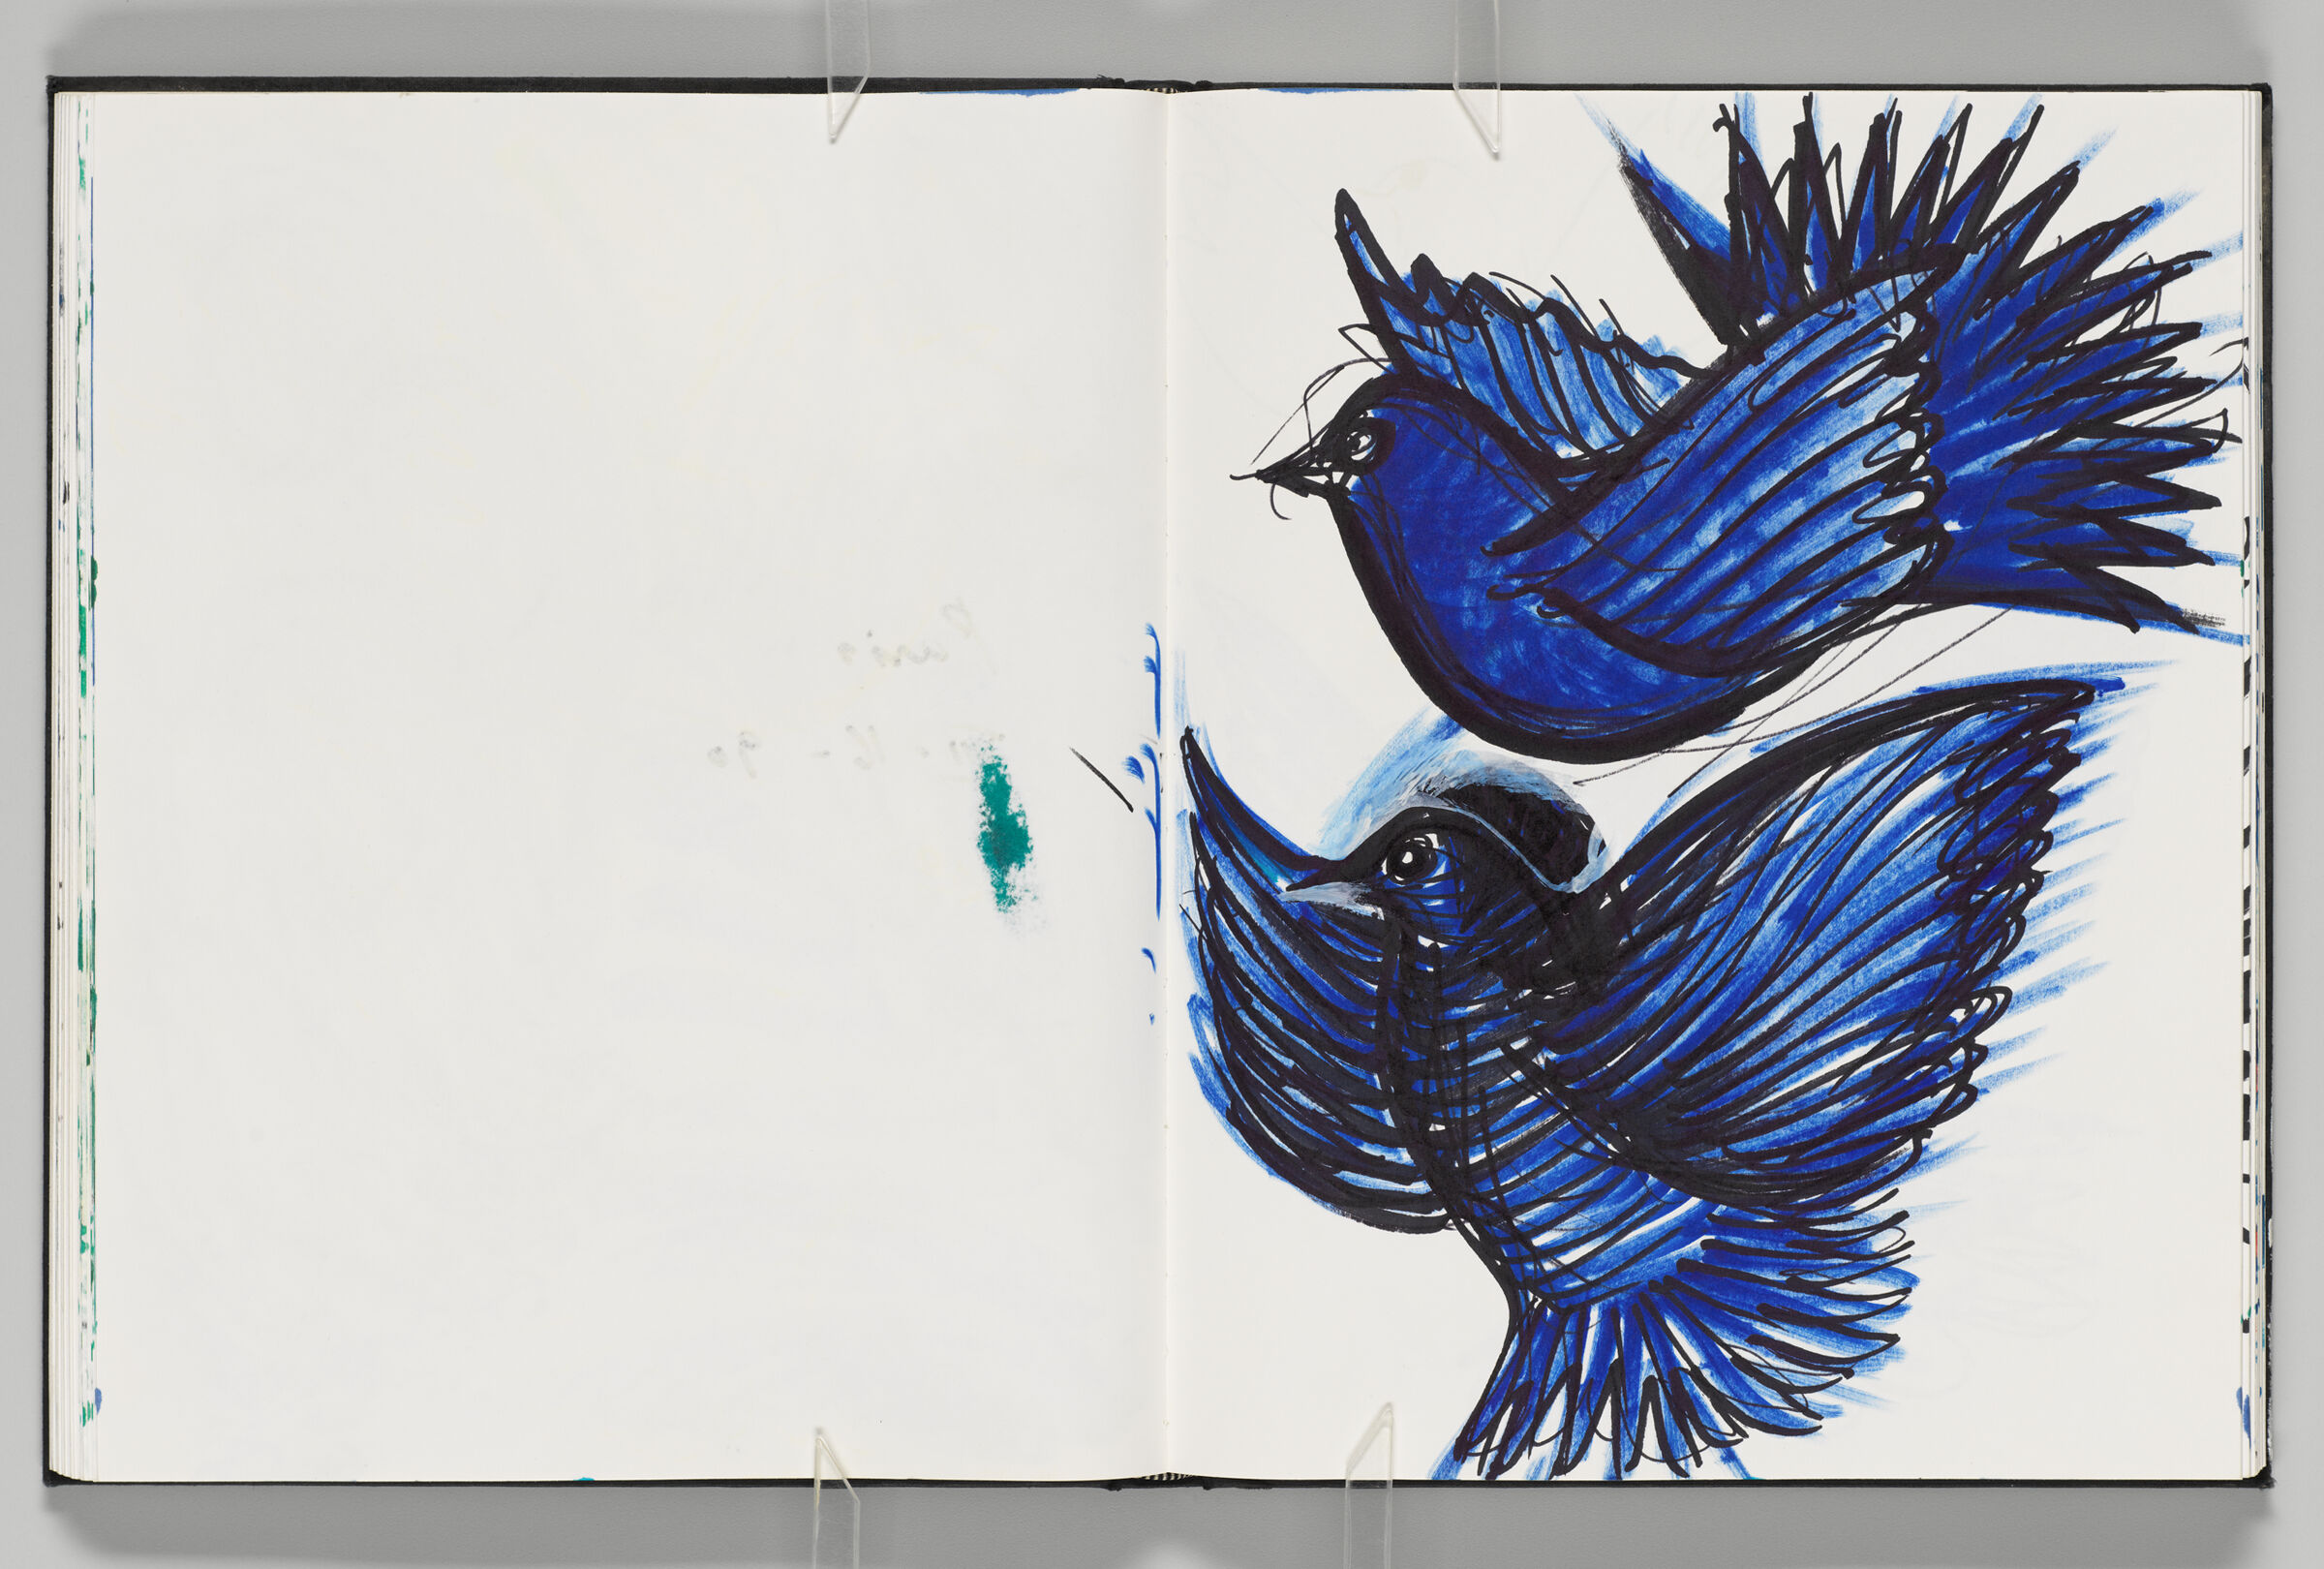 Untitled (Bleed-Through Of Previous Page And Color Transfer, Left Page); Untitled (Doves, Right Page)
